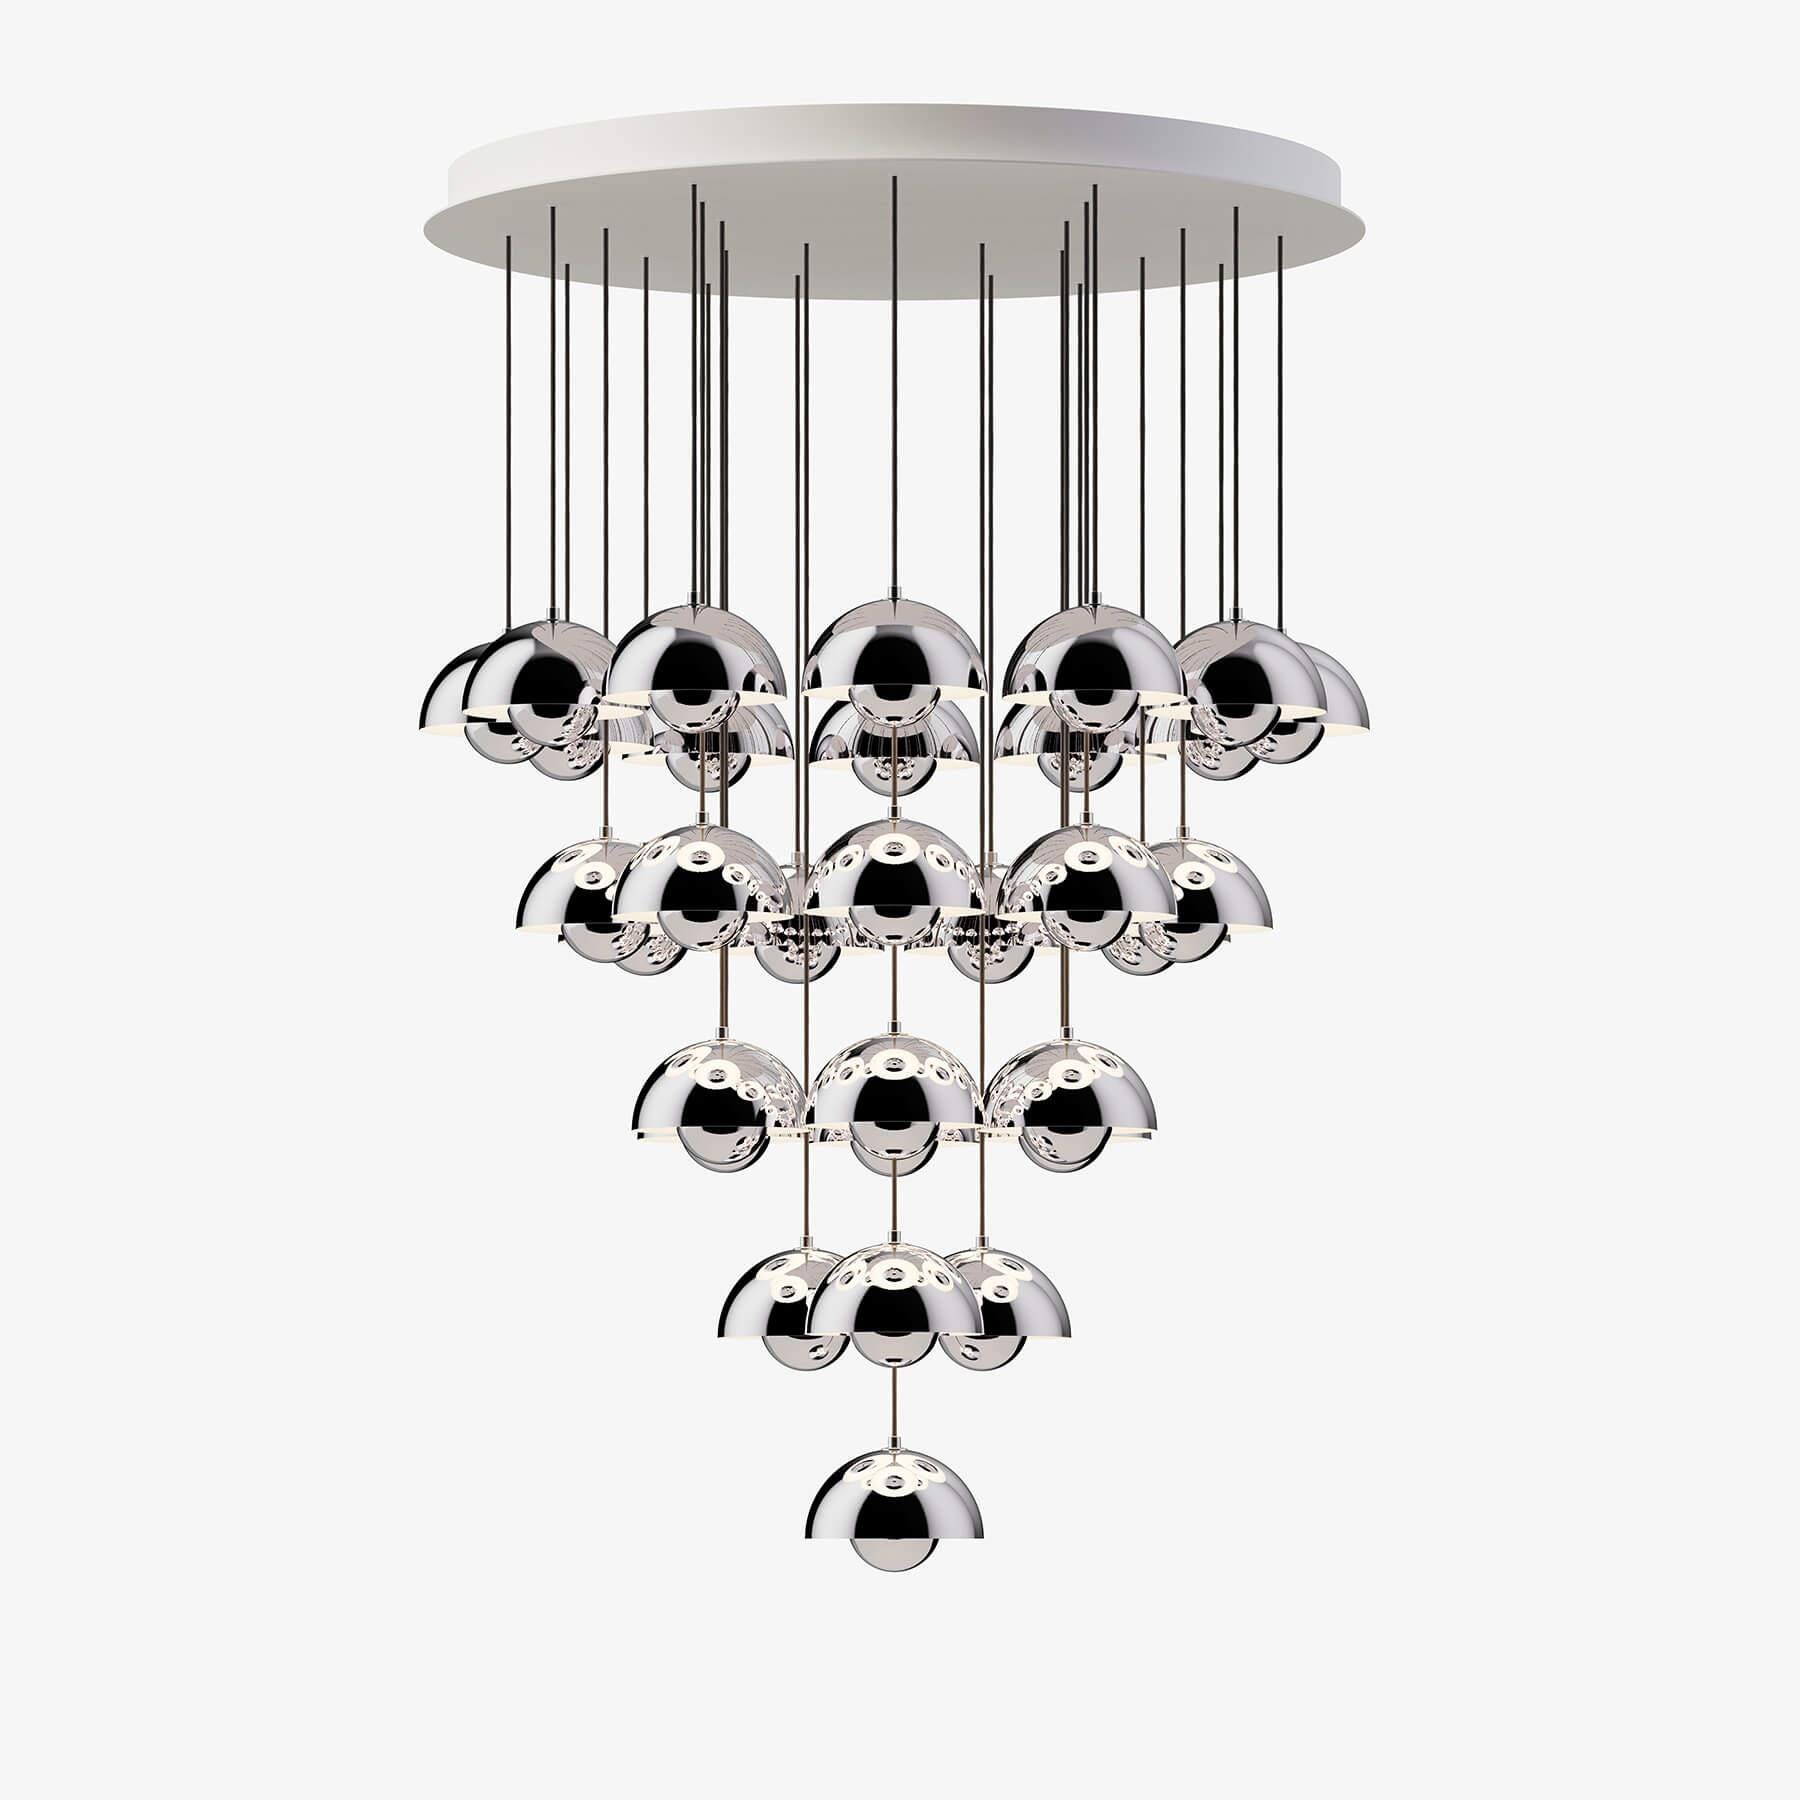 Tradition Vp10 Flowerpot Chandelier 31 Shades Chrome Plated Silver